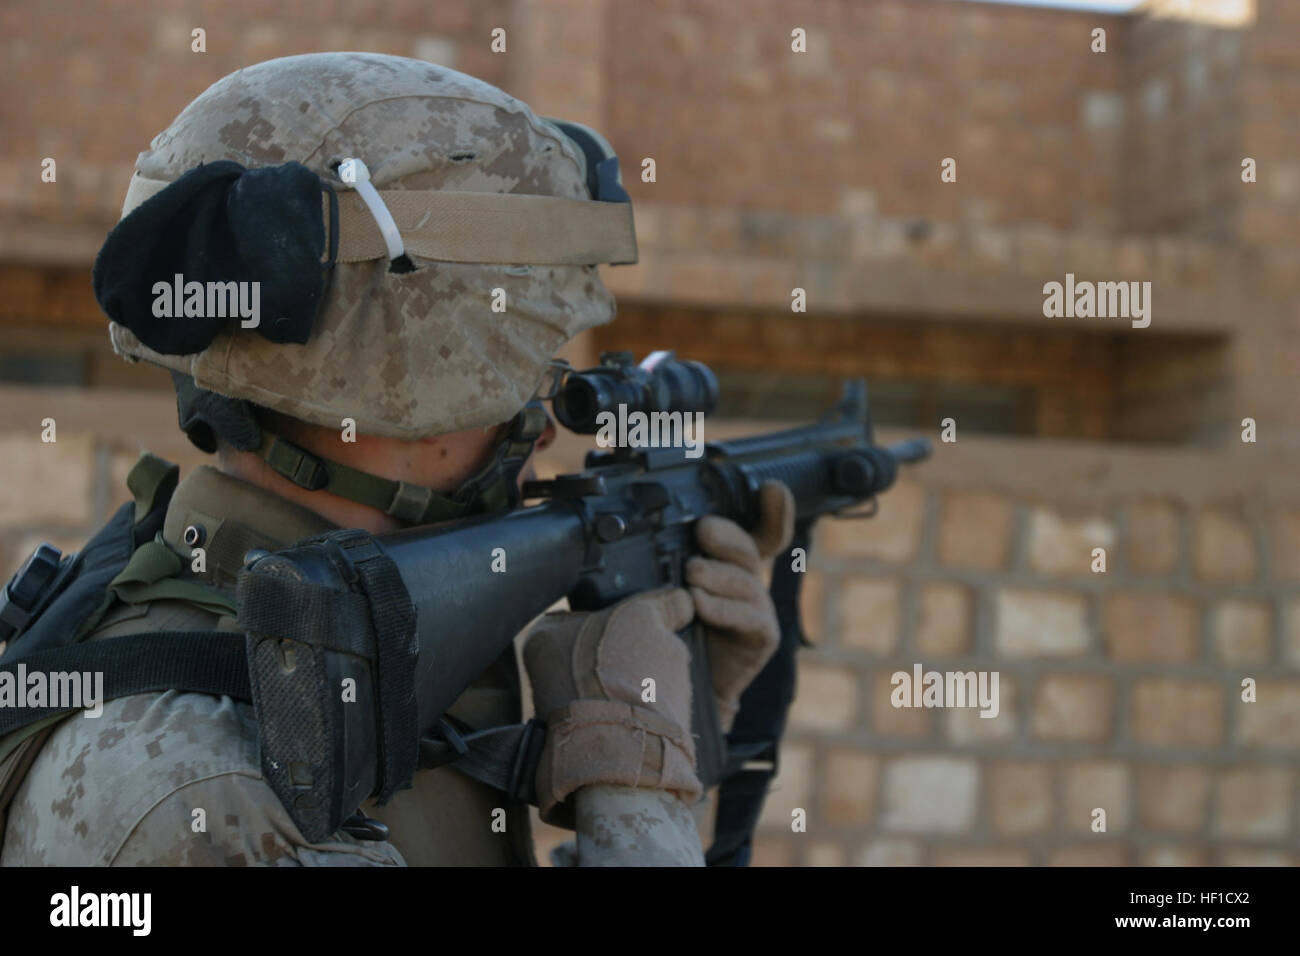 U.S. Marine Lance Cpl. Jeremy P. Cook from 4th Squad, 1st Platoon (1st Plt), Alpha Battery, 1st Battalion, 12th Marines (1/12), Task Force Military Police (TFMP) peers through the scope of his M4 rifle for abnormal activity during a foot patrol through Al Waleed, Iraq. 1st Plt develops community relations through foot patrols and provide security for the town by the Iraq-Syria border. 1/12 TFMP is deployed with Multi National Forces-West in support of Operation Iraqi Freedom in the Al Anbar province of Iraq to develop Iraqi Security Forces, facilitate the development of official rule of law th Stock Photo